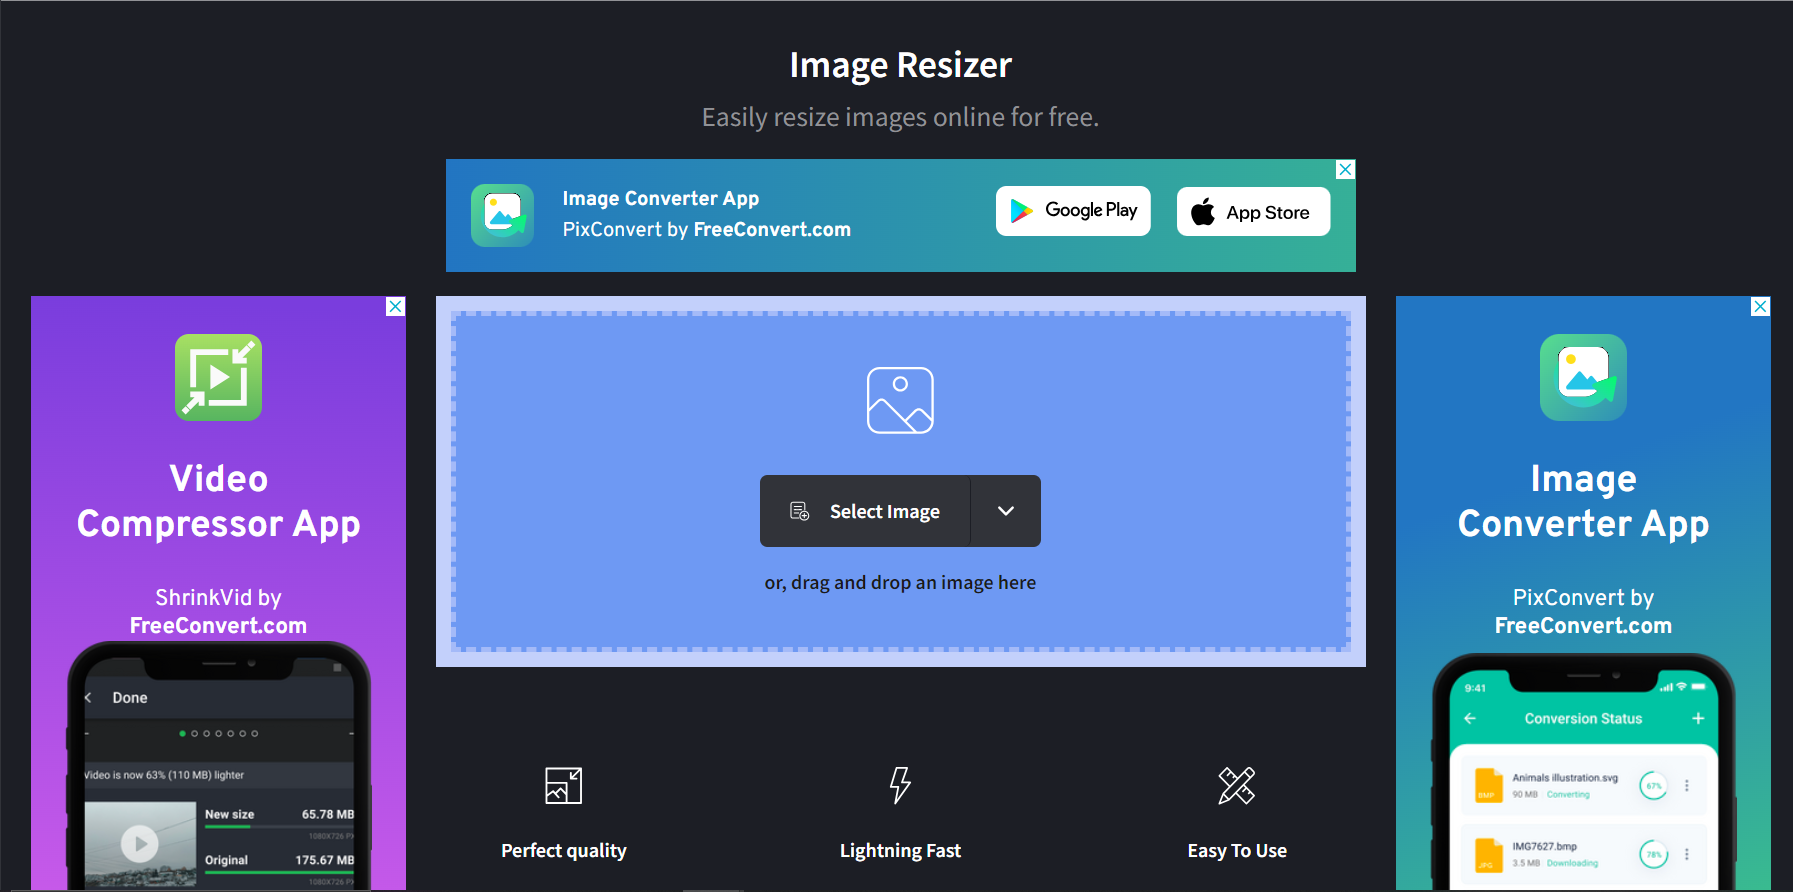 How To Use ImageResizer.com Online: Step 1